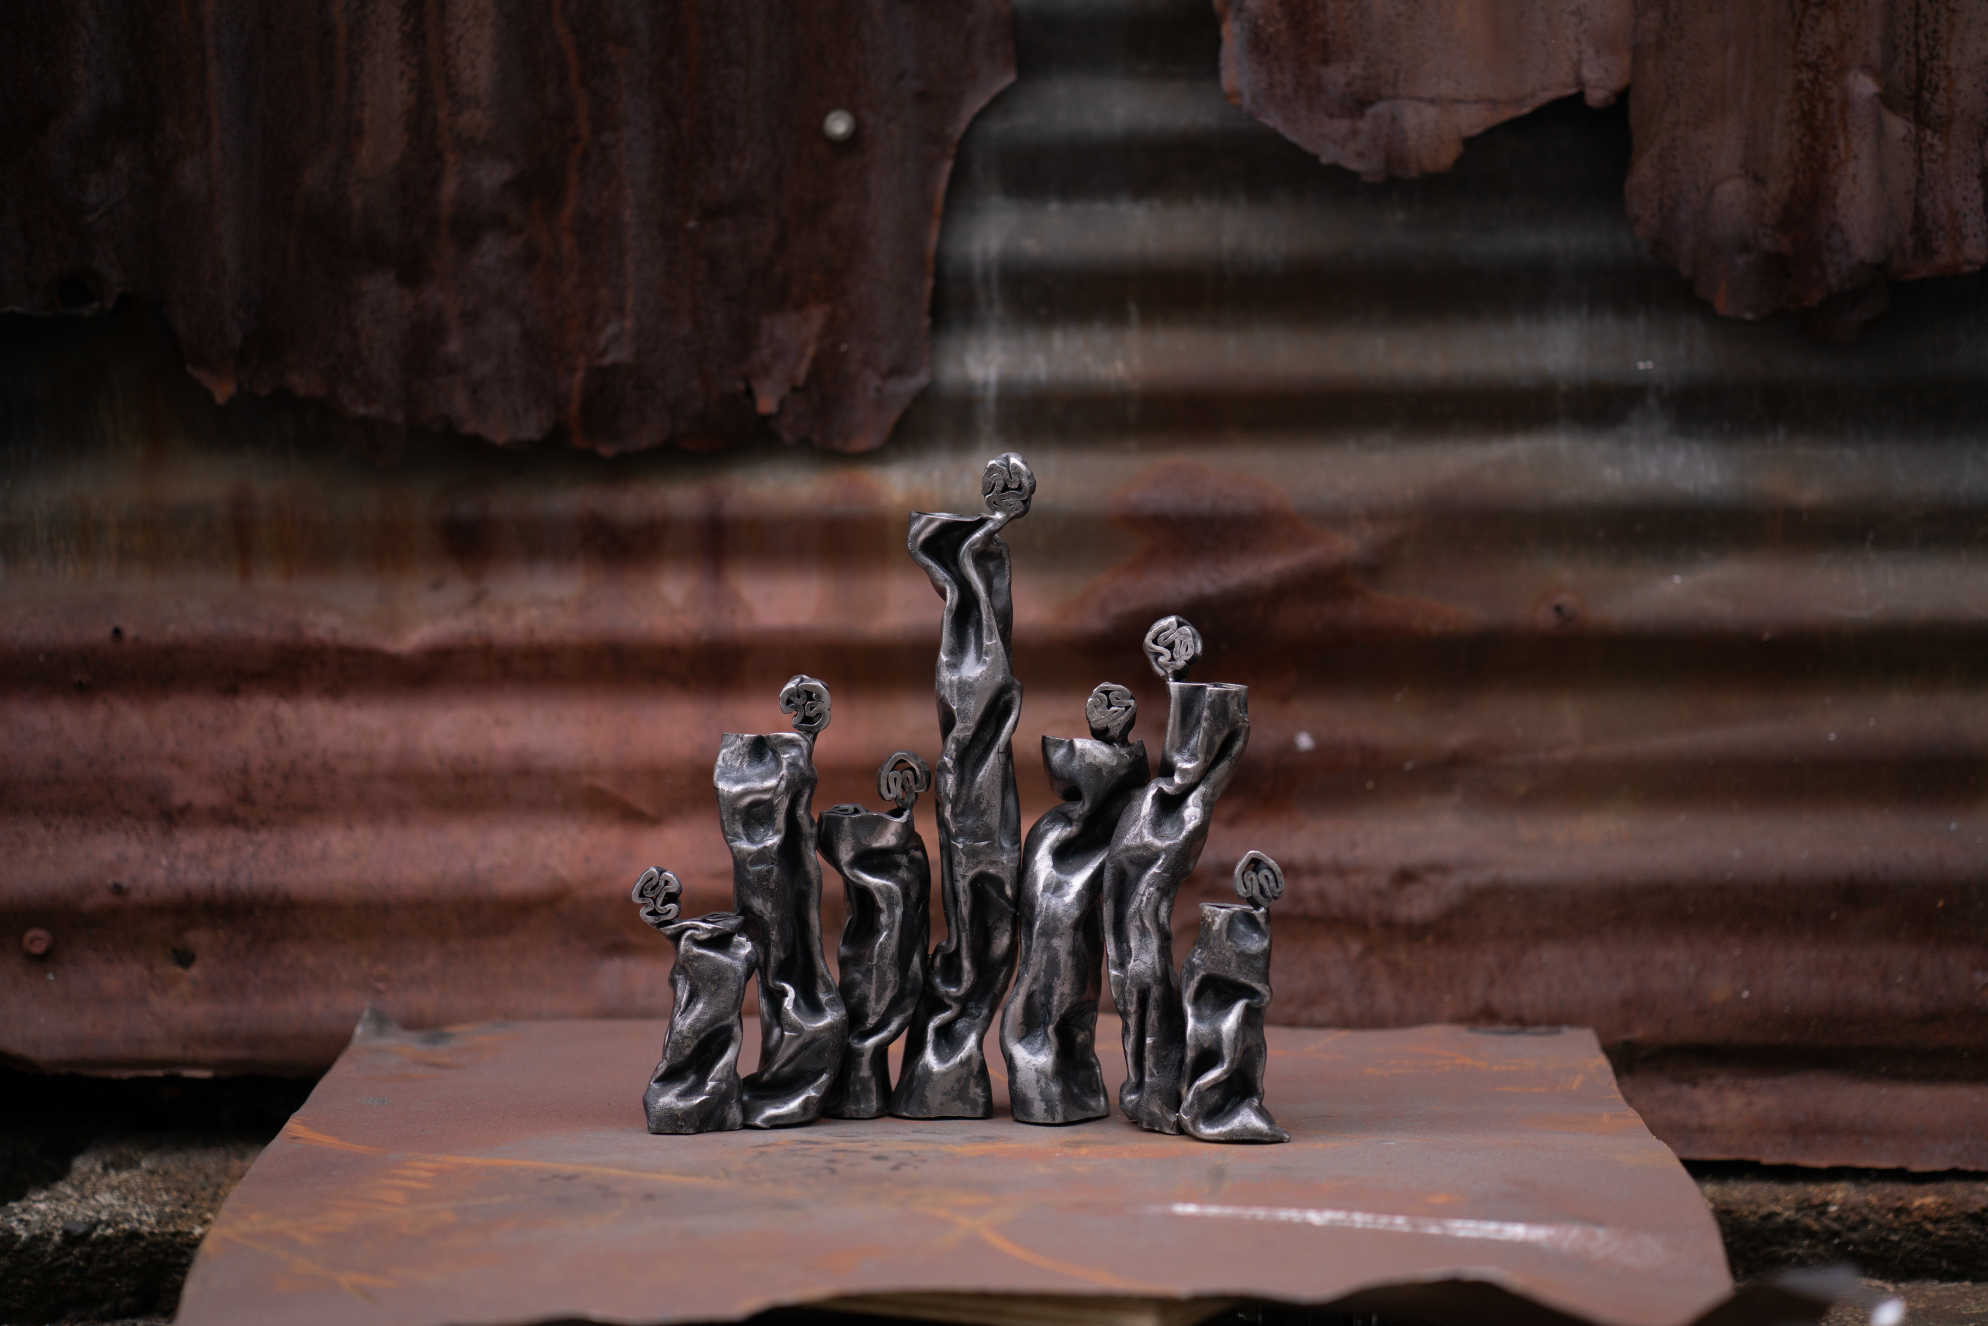 Melting wax captured perfectly in wrought iron, the texture and flows coming across in the metal.